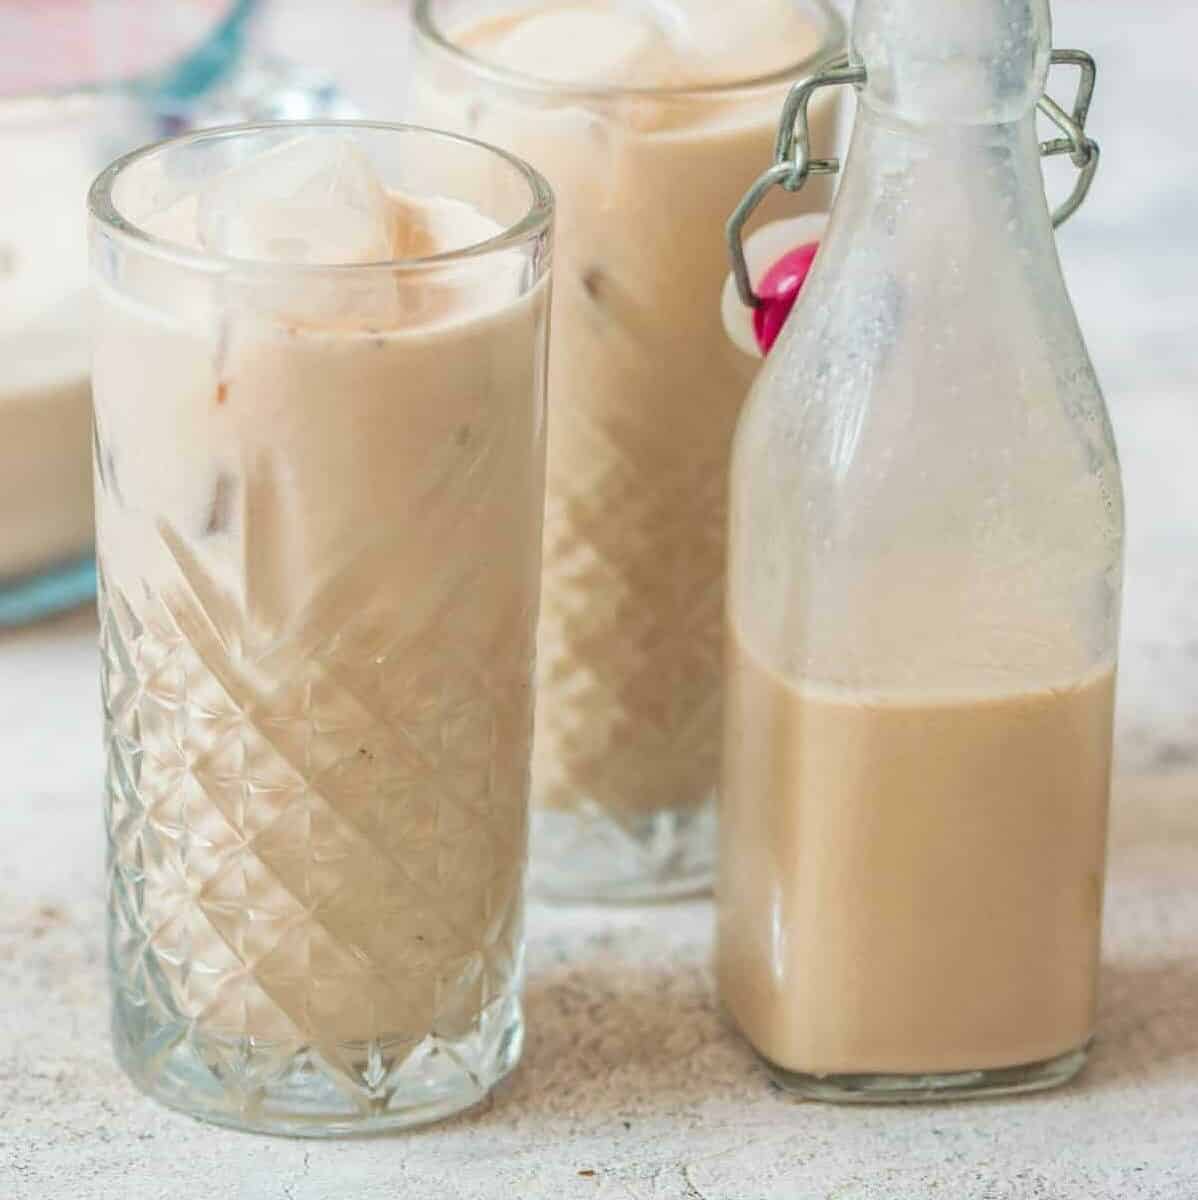  With just a few simple ingredients, you can make your own Irish cream at home!